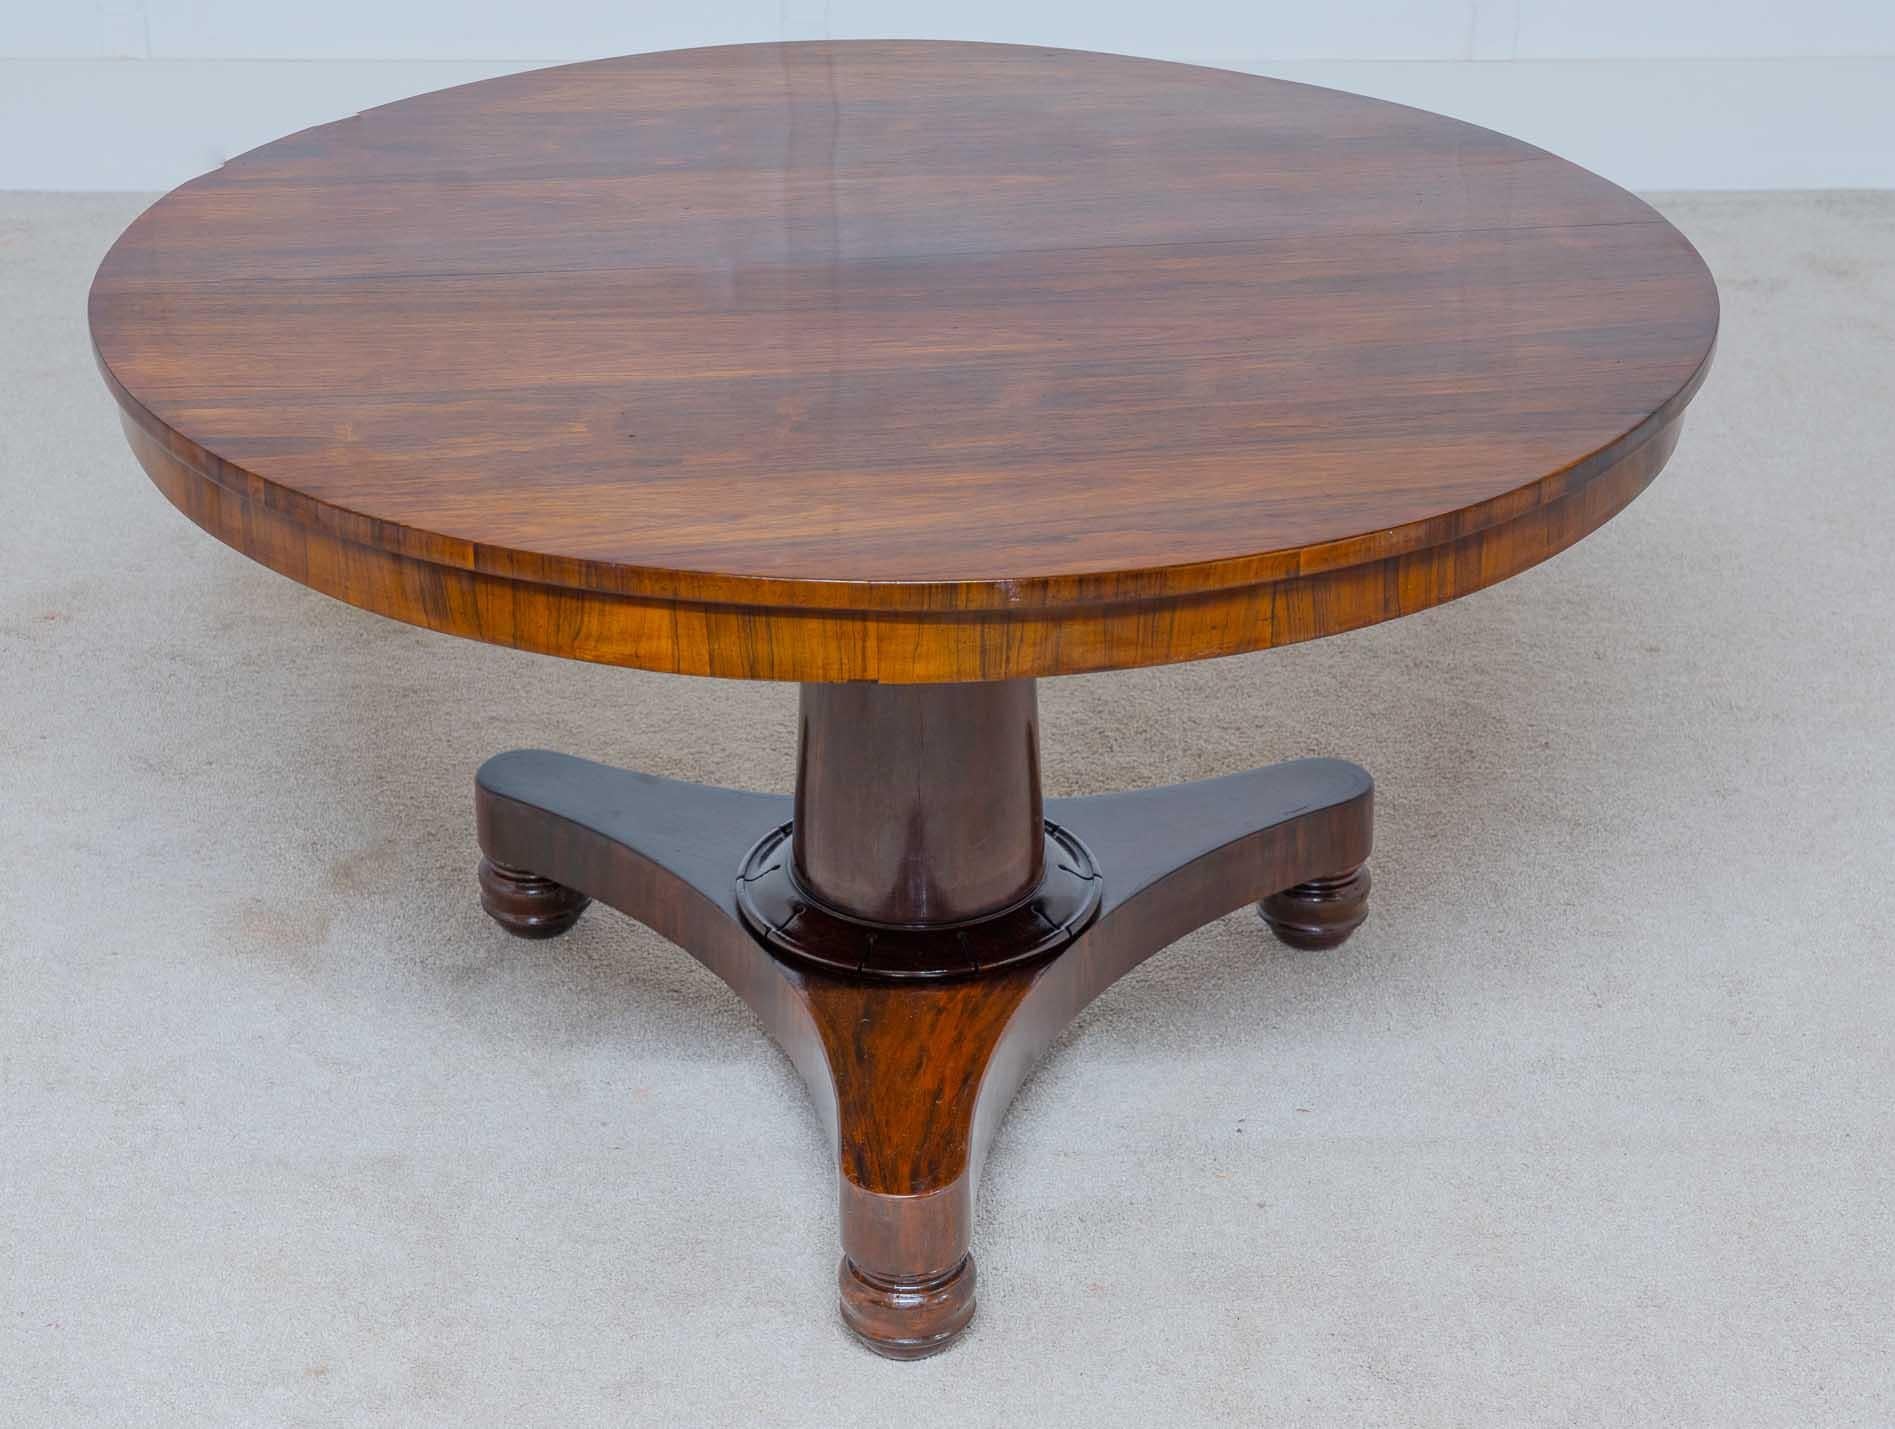 Gorgeous Victorian loo table in rosewood circa 1880
We believe this would have originally been a loo table - named after the card game - although now can function as an elegant dining or centre table
Stands on a tripartite pedestal base and the